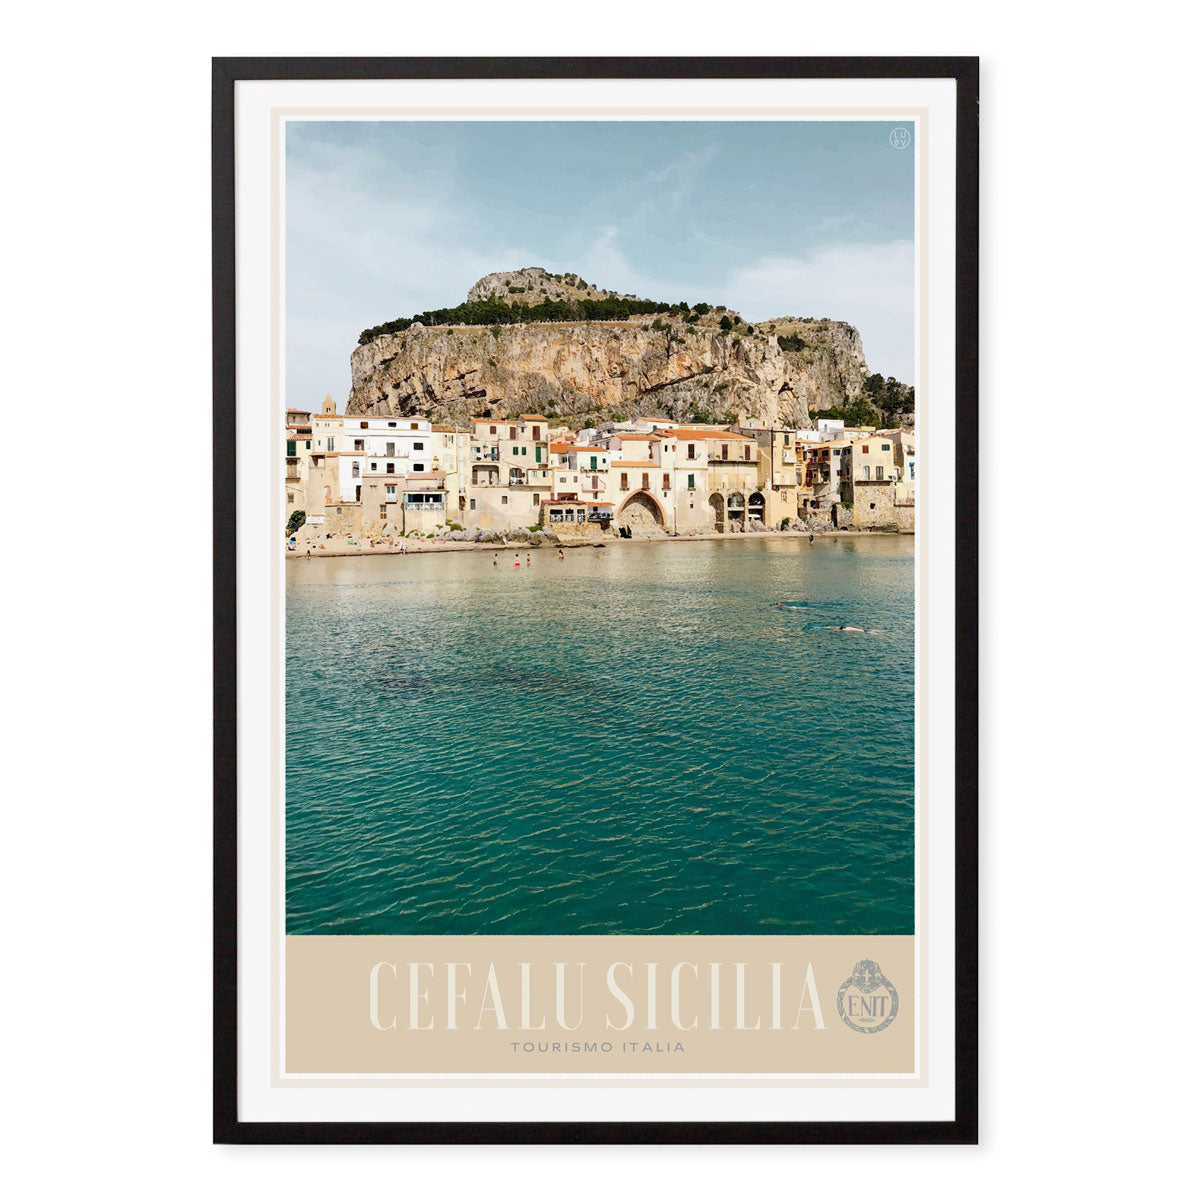 Cefalu Sicily retro vintage poster print in black frame from Places We Luv